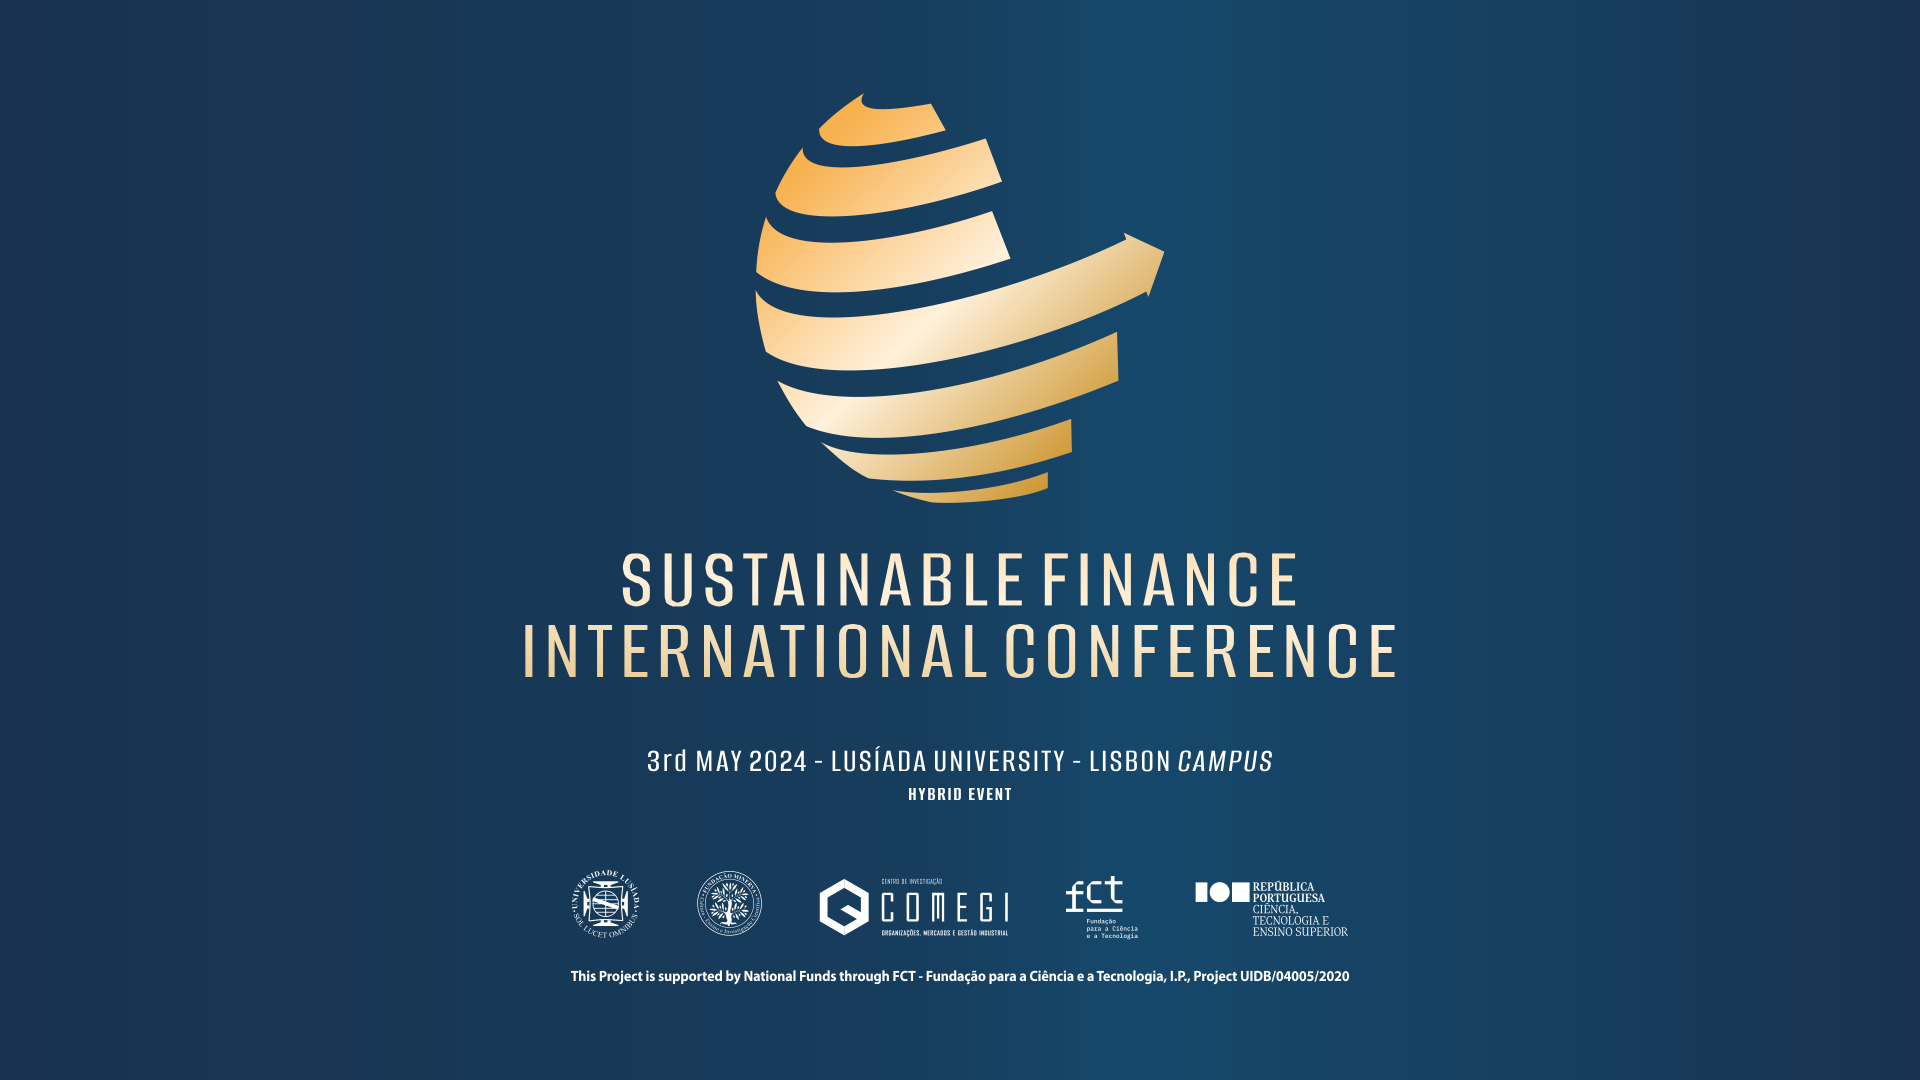 International Conference - Sustainable Finance